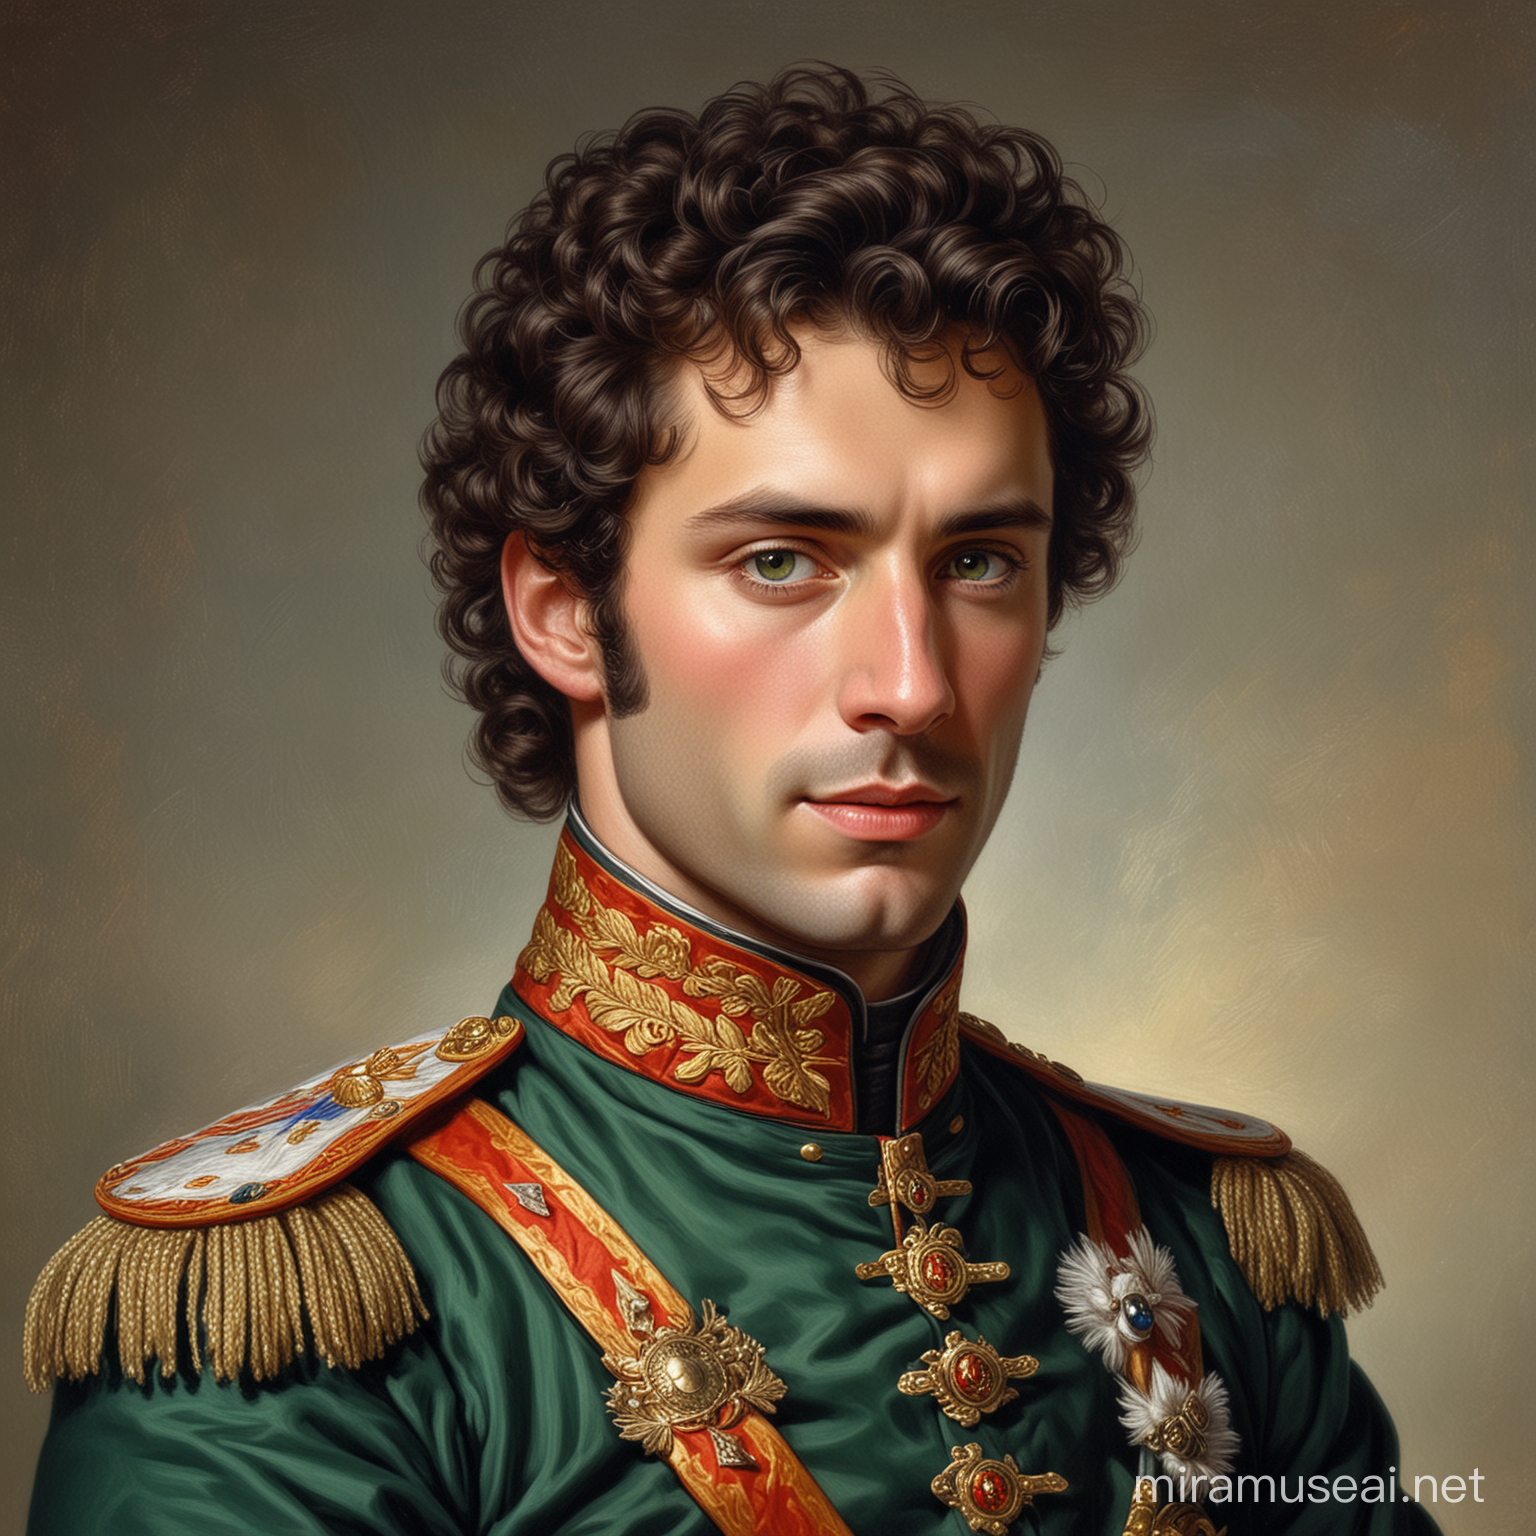 19th Century Hussar Portrait with Dark Curly Hair and Green Eyes